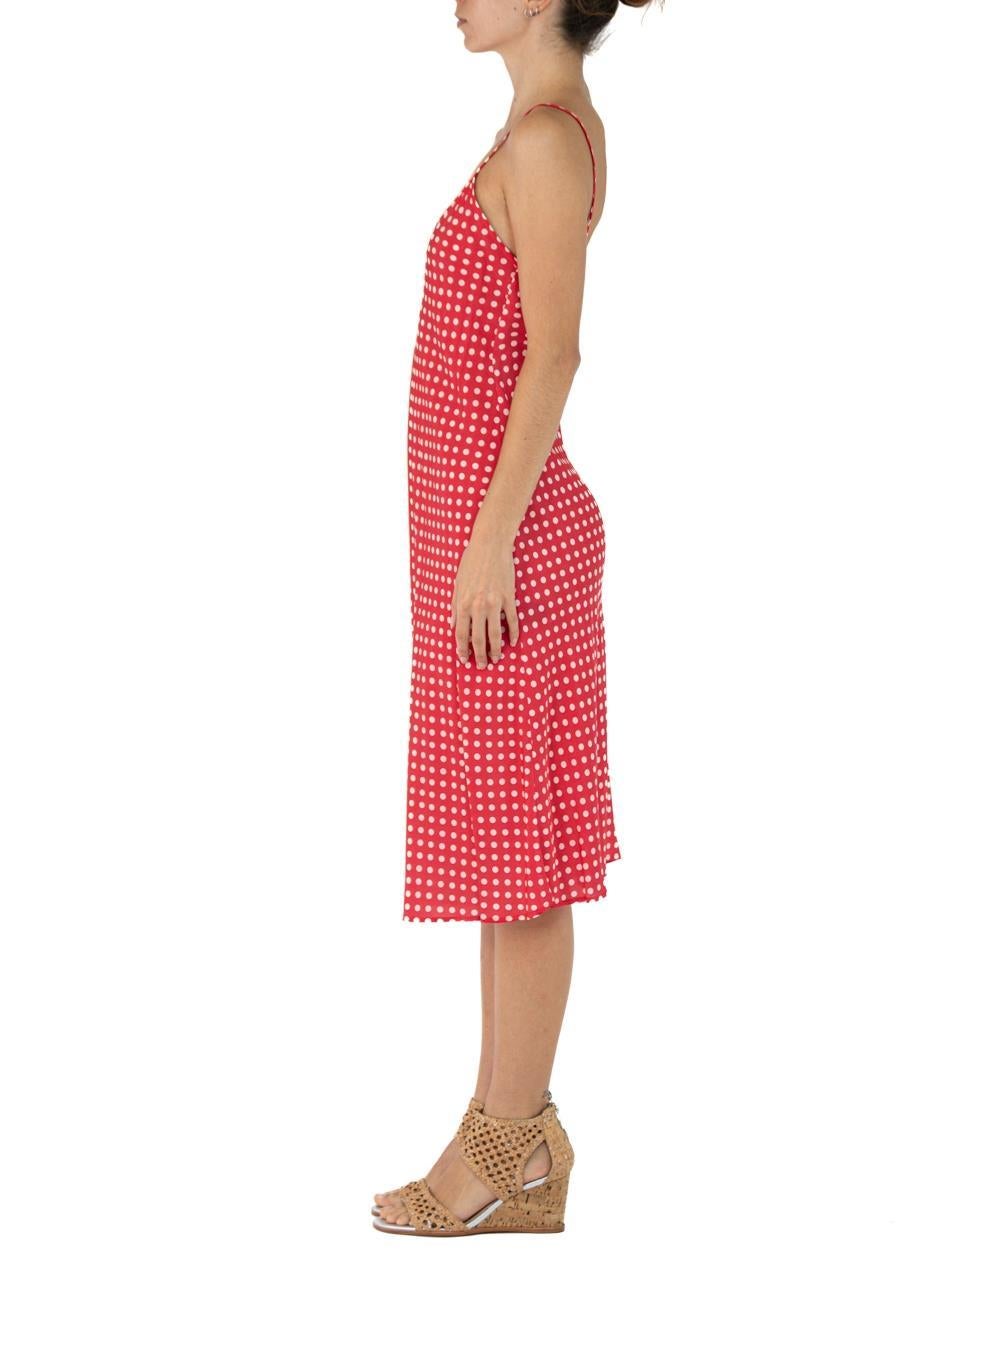 Morphew Collection Red & White Polka Dot Cold Rayon Bias  Slip Dress Master Medium
MORPHEW COLLECTION is made entirely by hand in our NYC Ateliér of rare antique materials sourced from around the globe. Our sustainable vintage materials represent